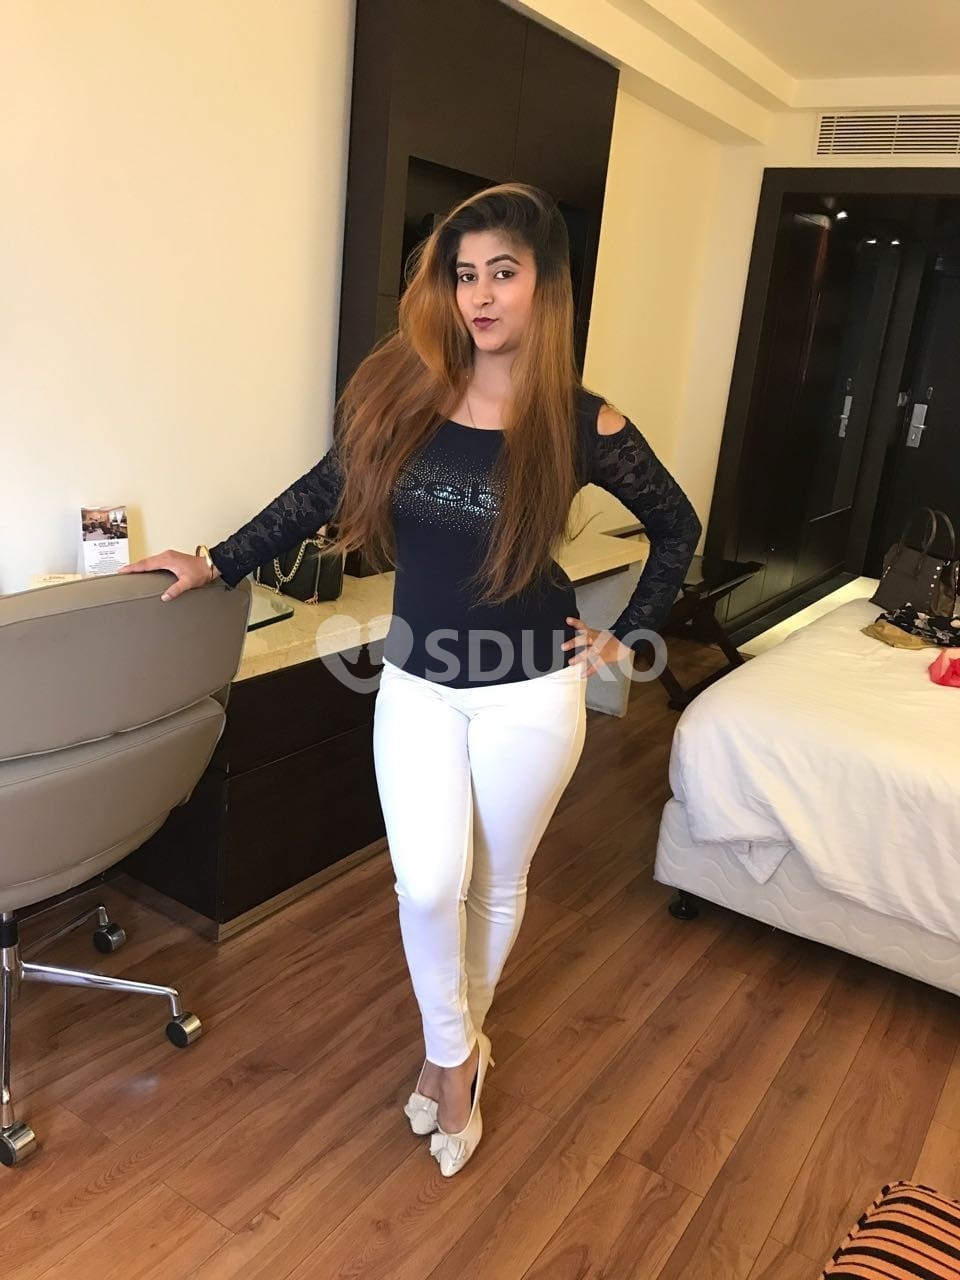 Aurangabad CITY 24 X 7 HRS+- AVAILABLE SERVICE 100% SATISFIED AND GENUINE CALL GIRLS SER